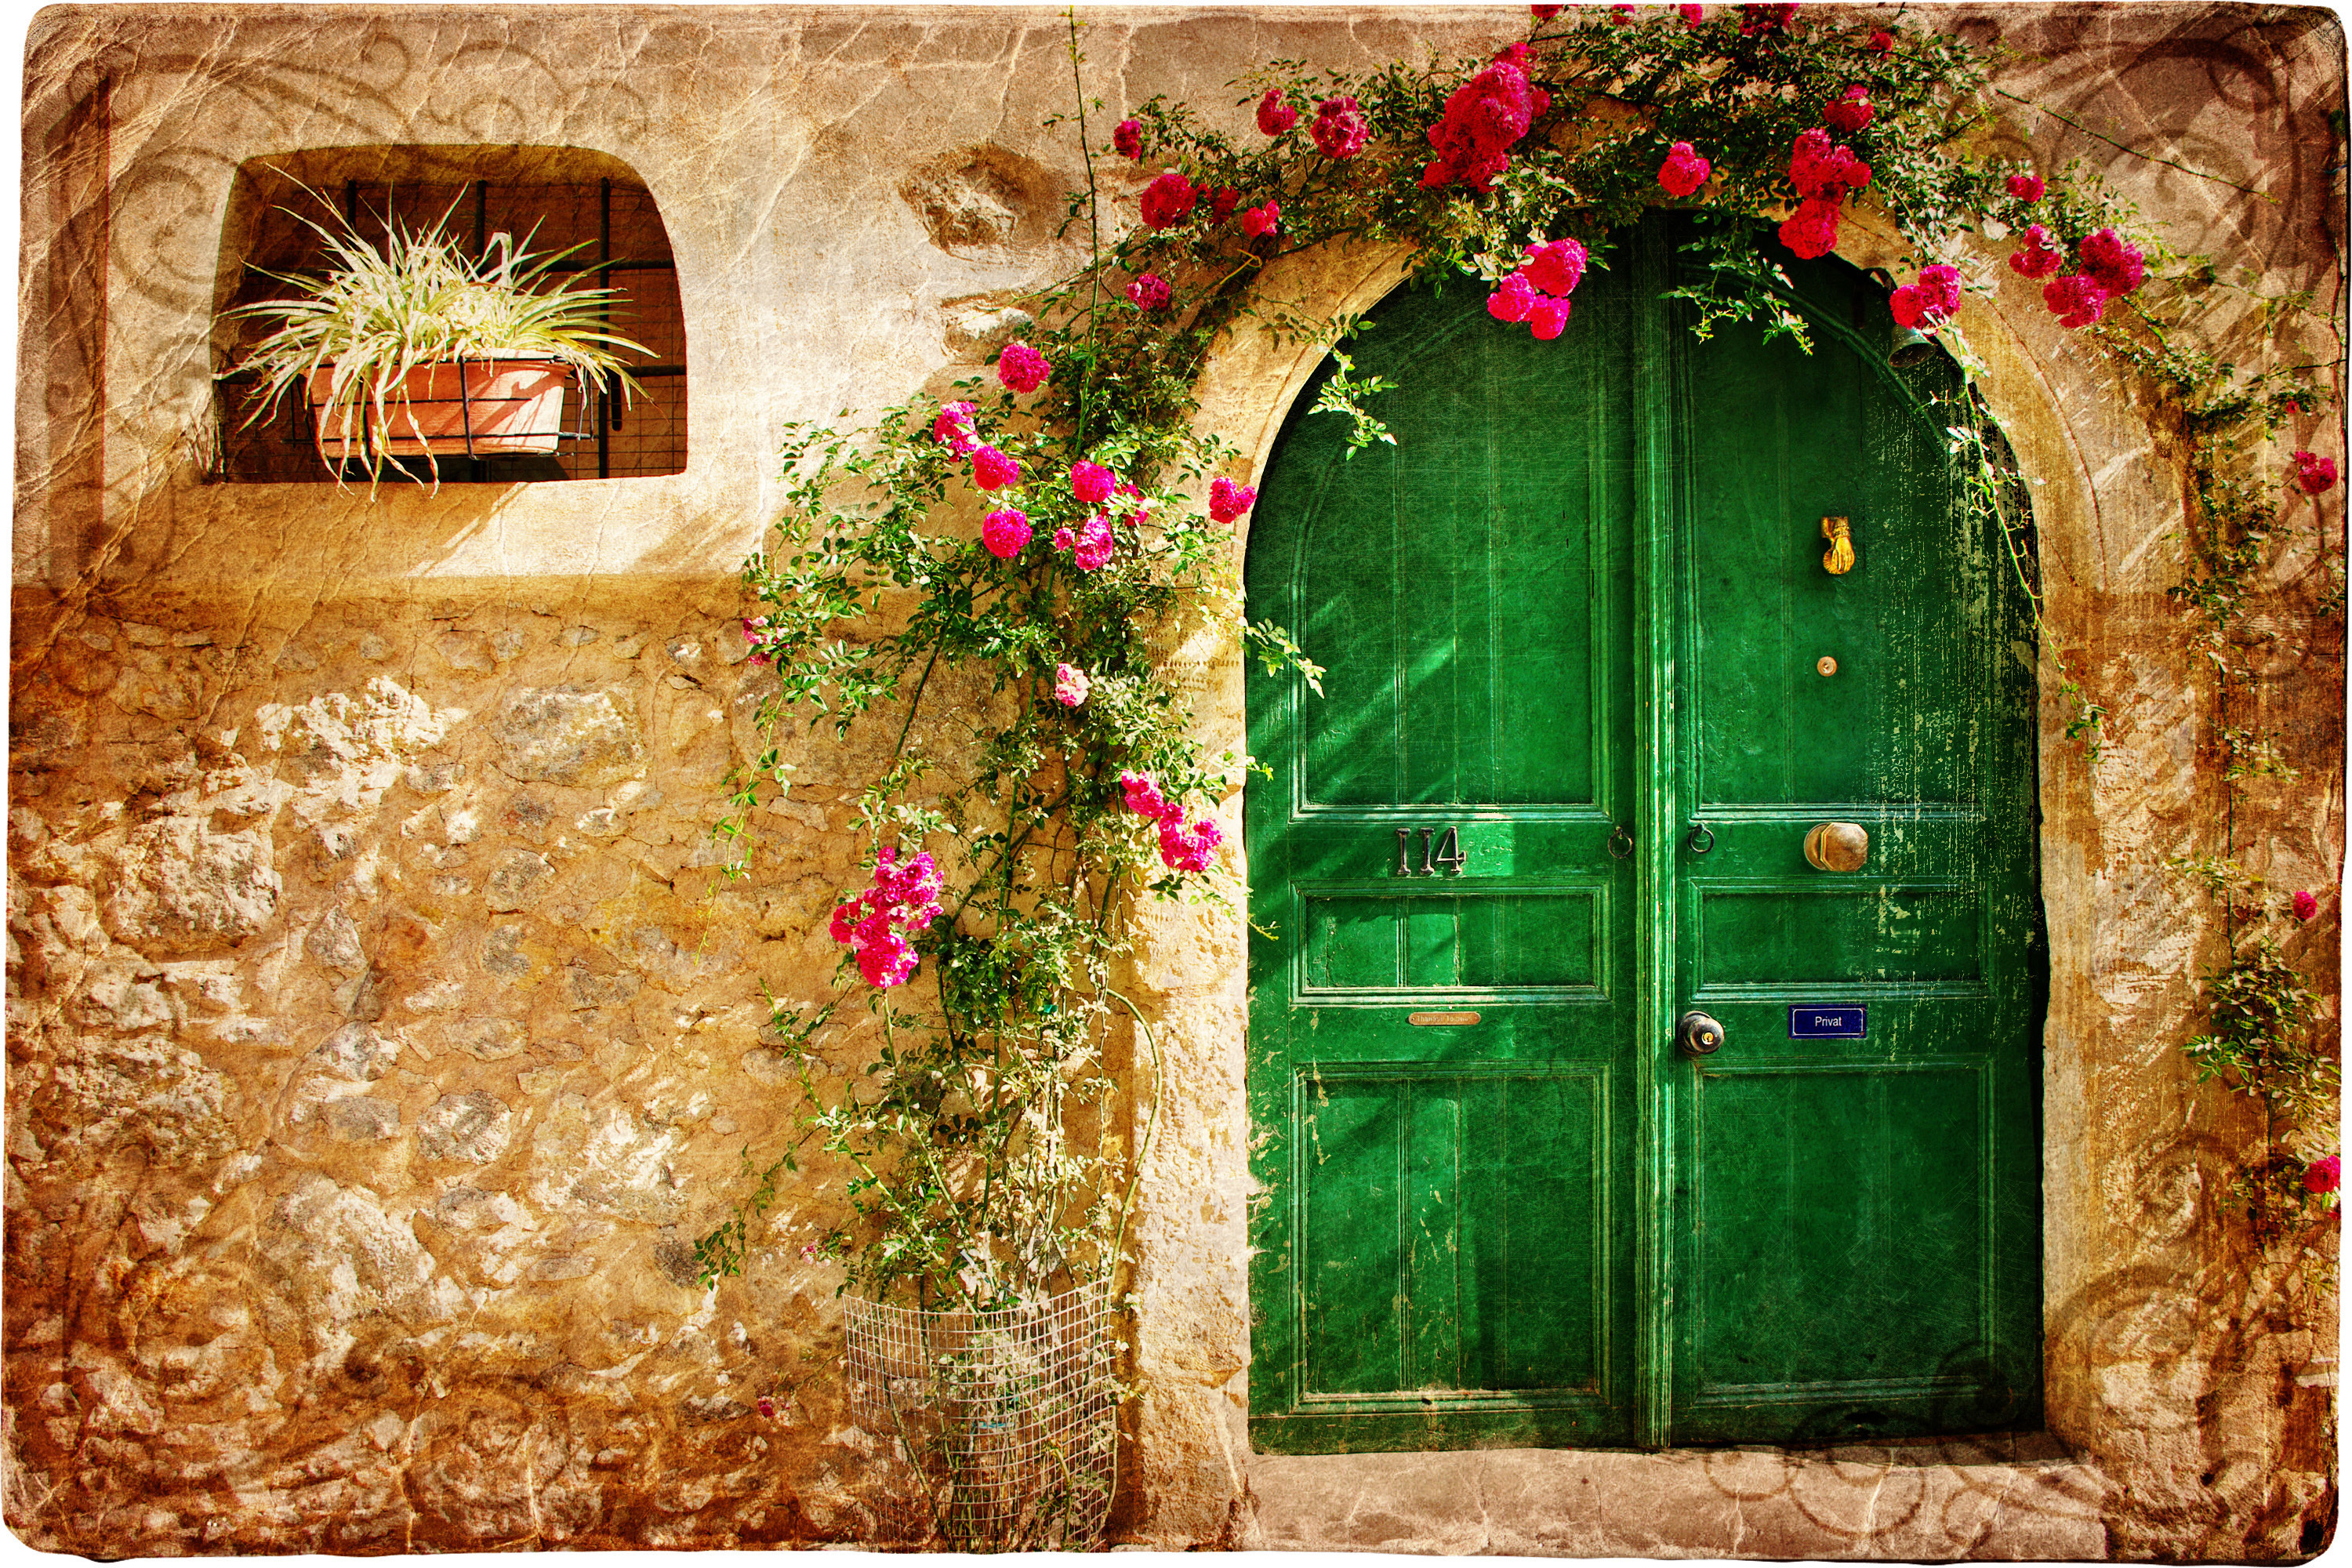 pink flower, door, flower, house, facade, stone, man made wallpapers for tablet